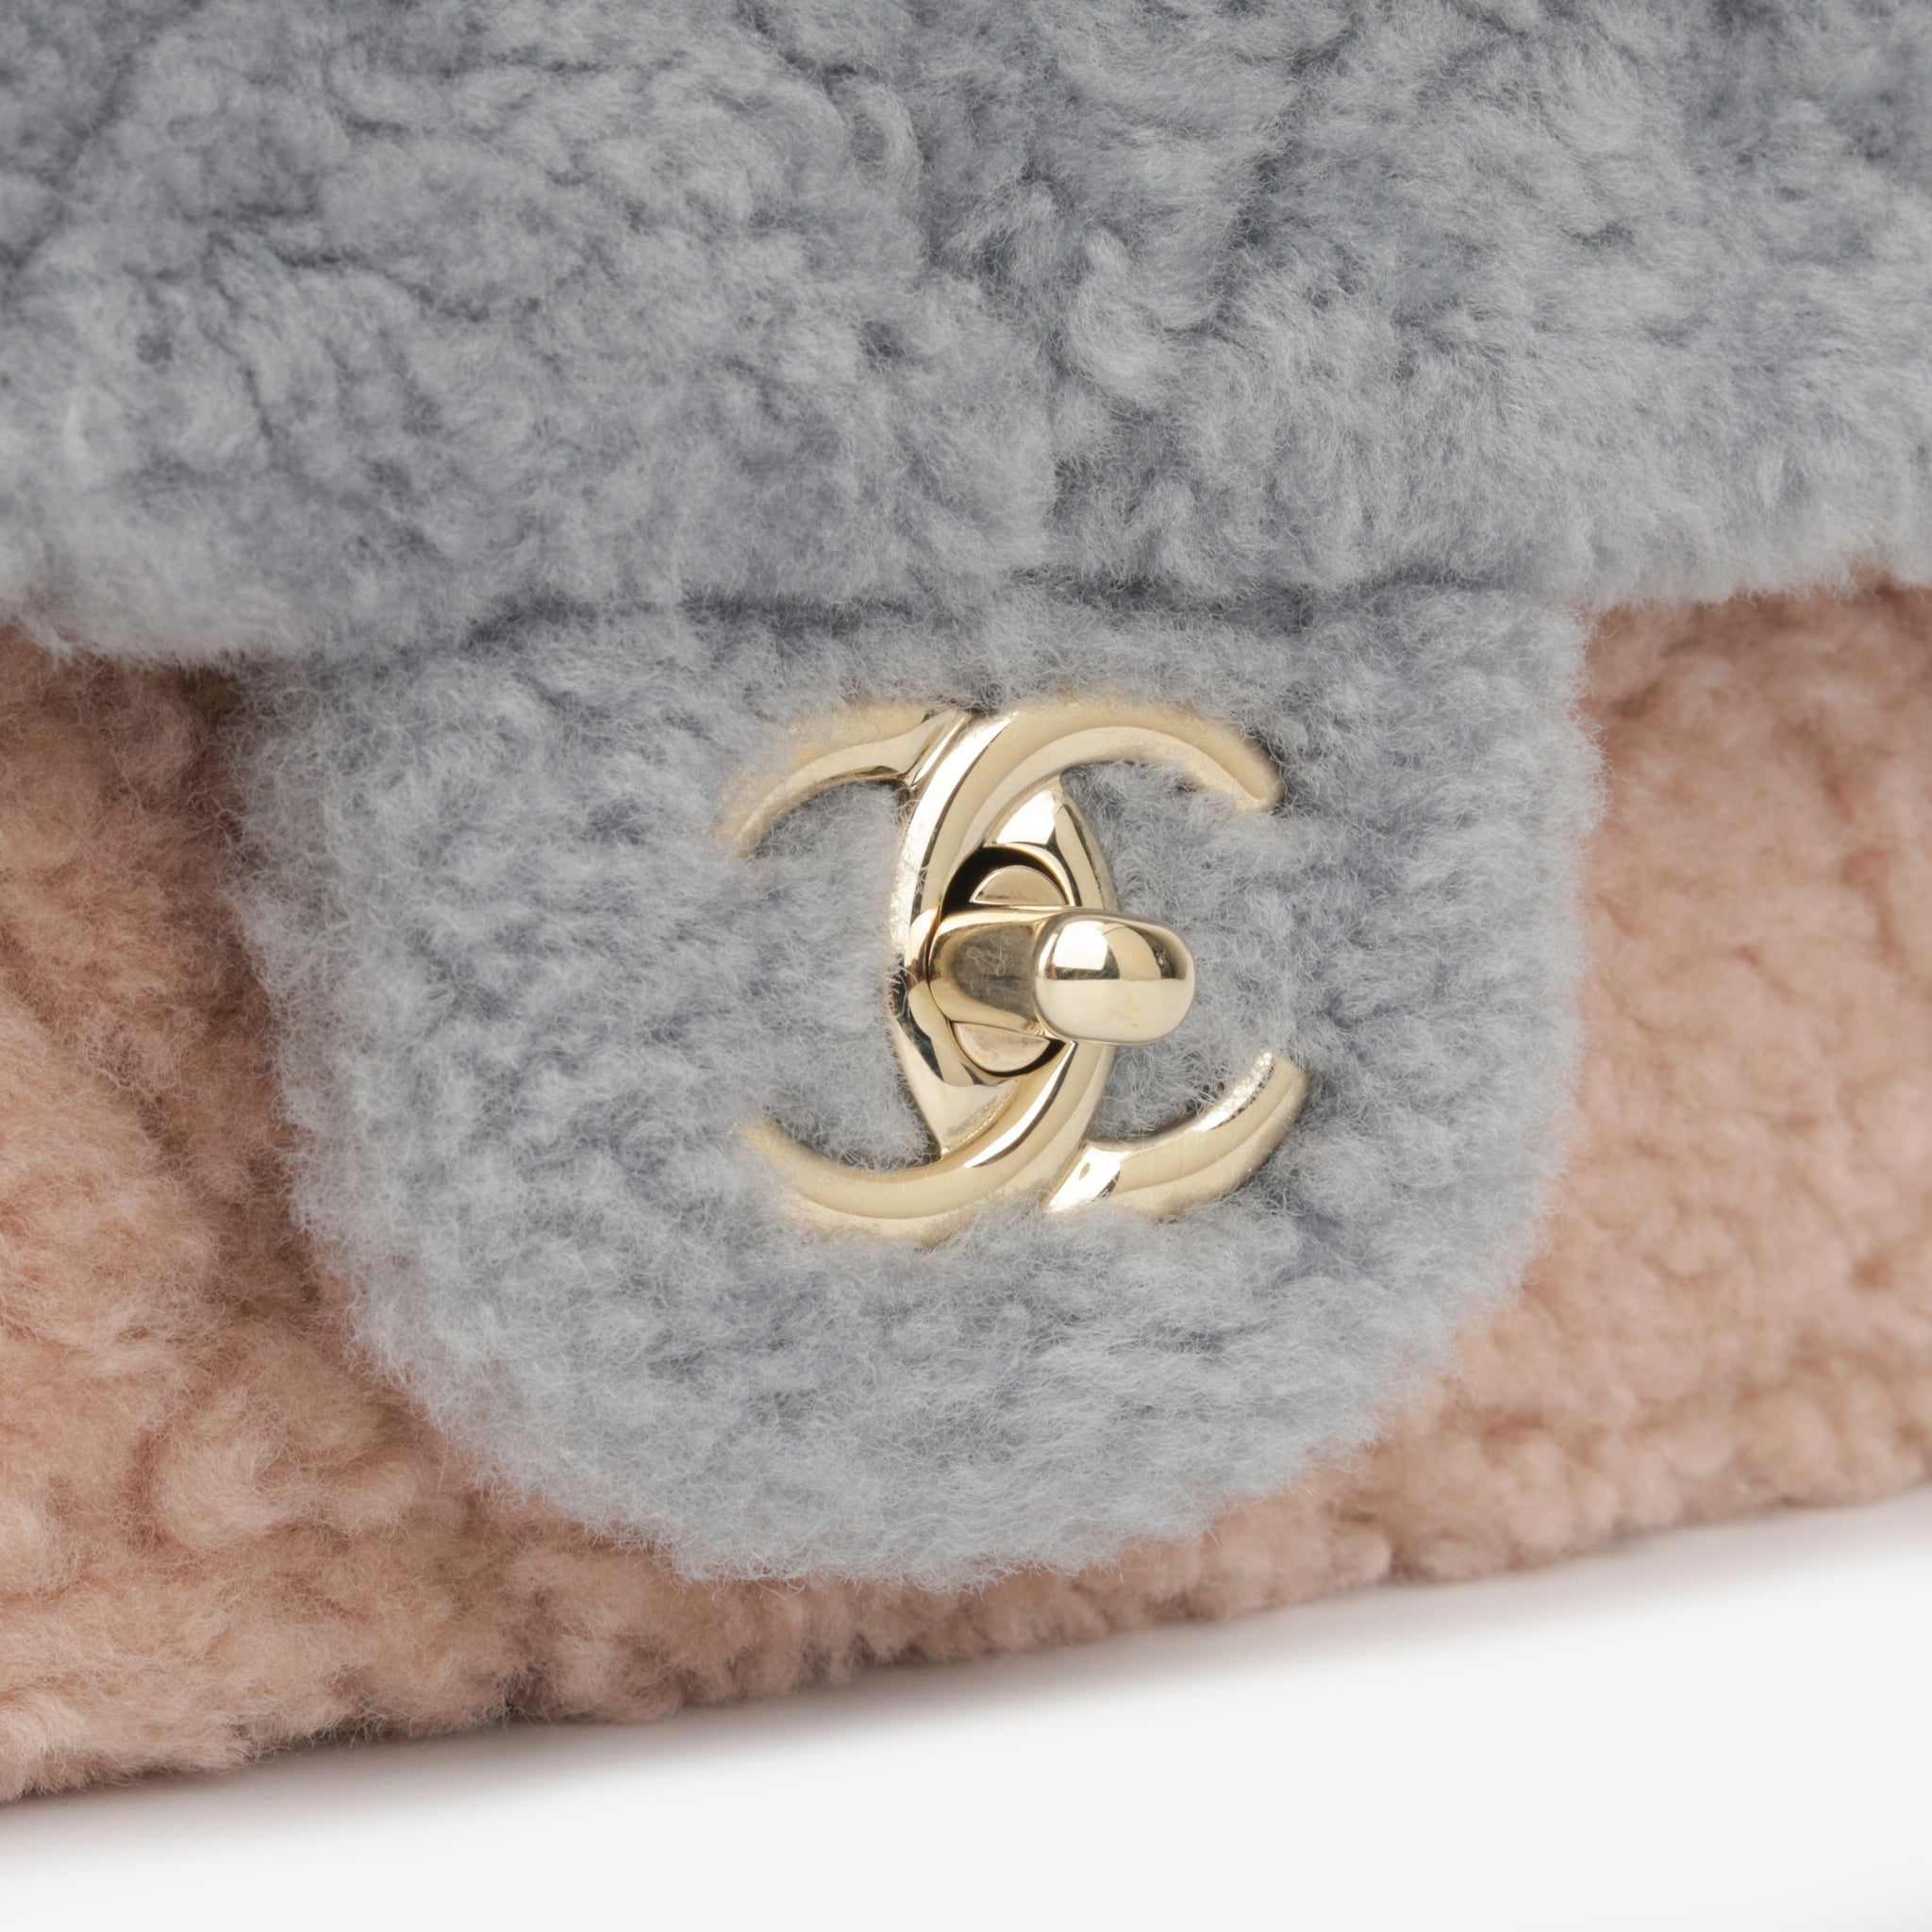 Chanel Shearling Flap – Lux Second Chance